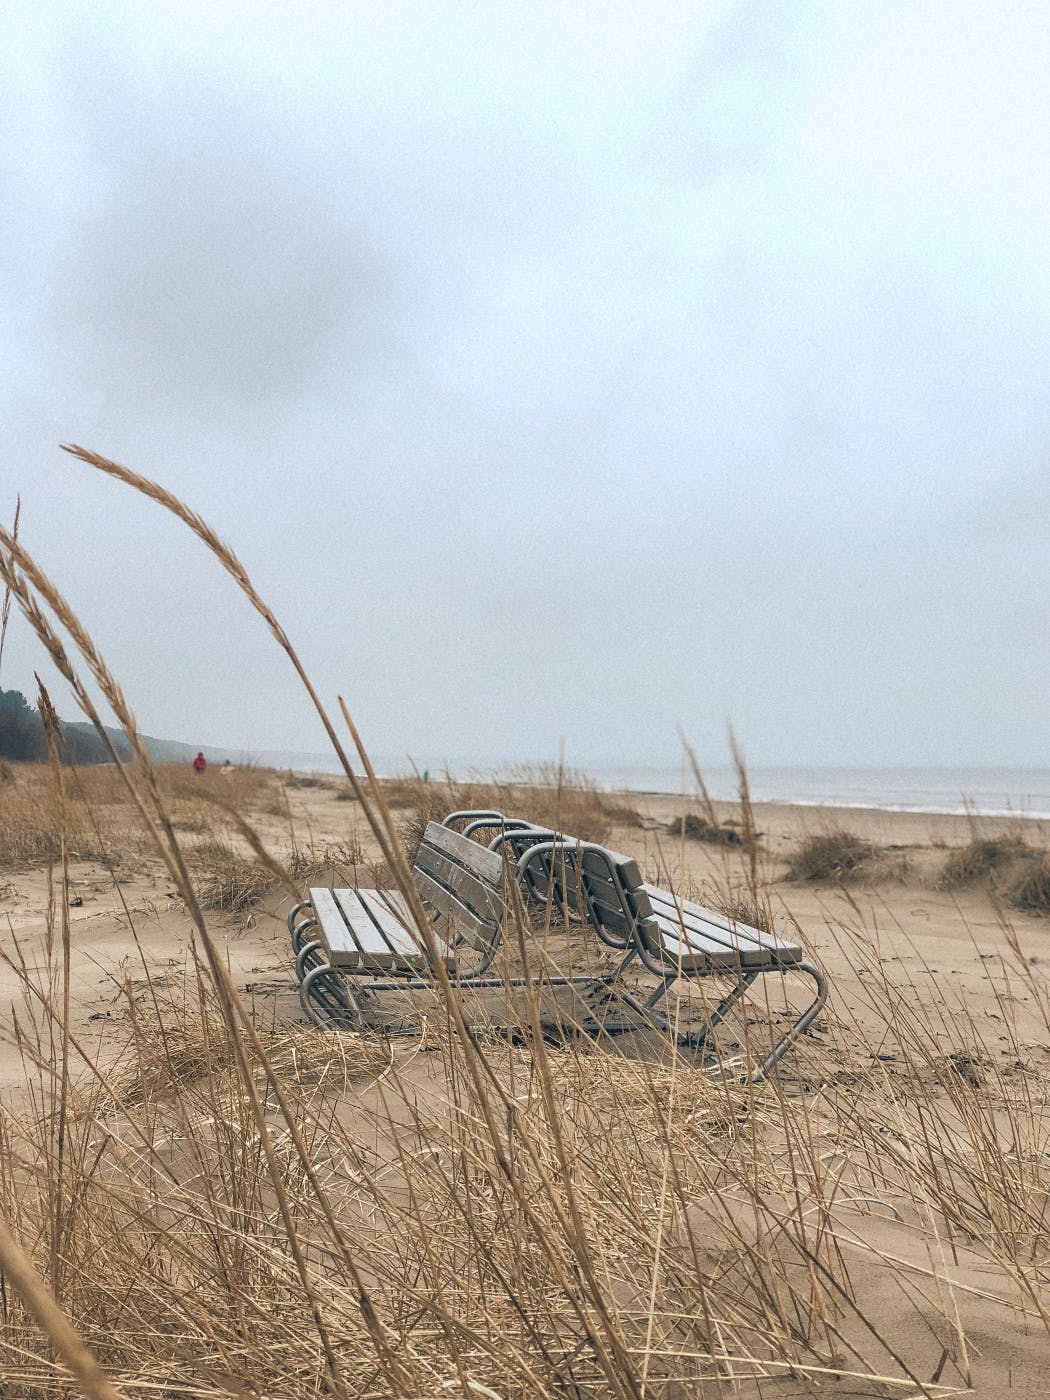 Two benches, back to back, on an empty windswept beach.